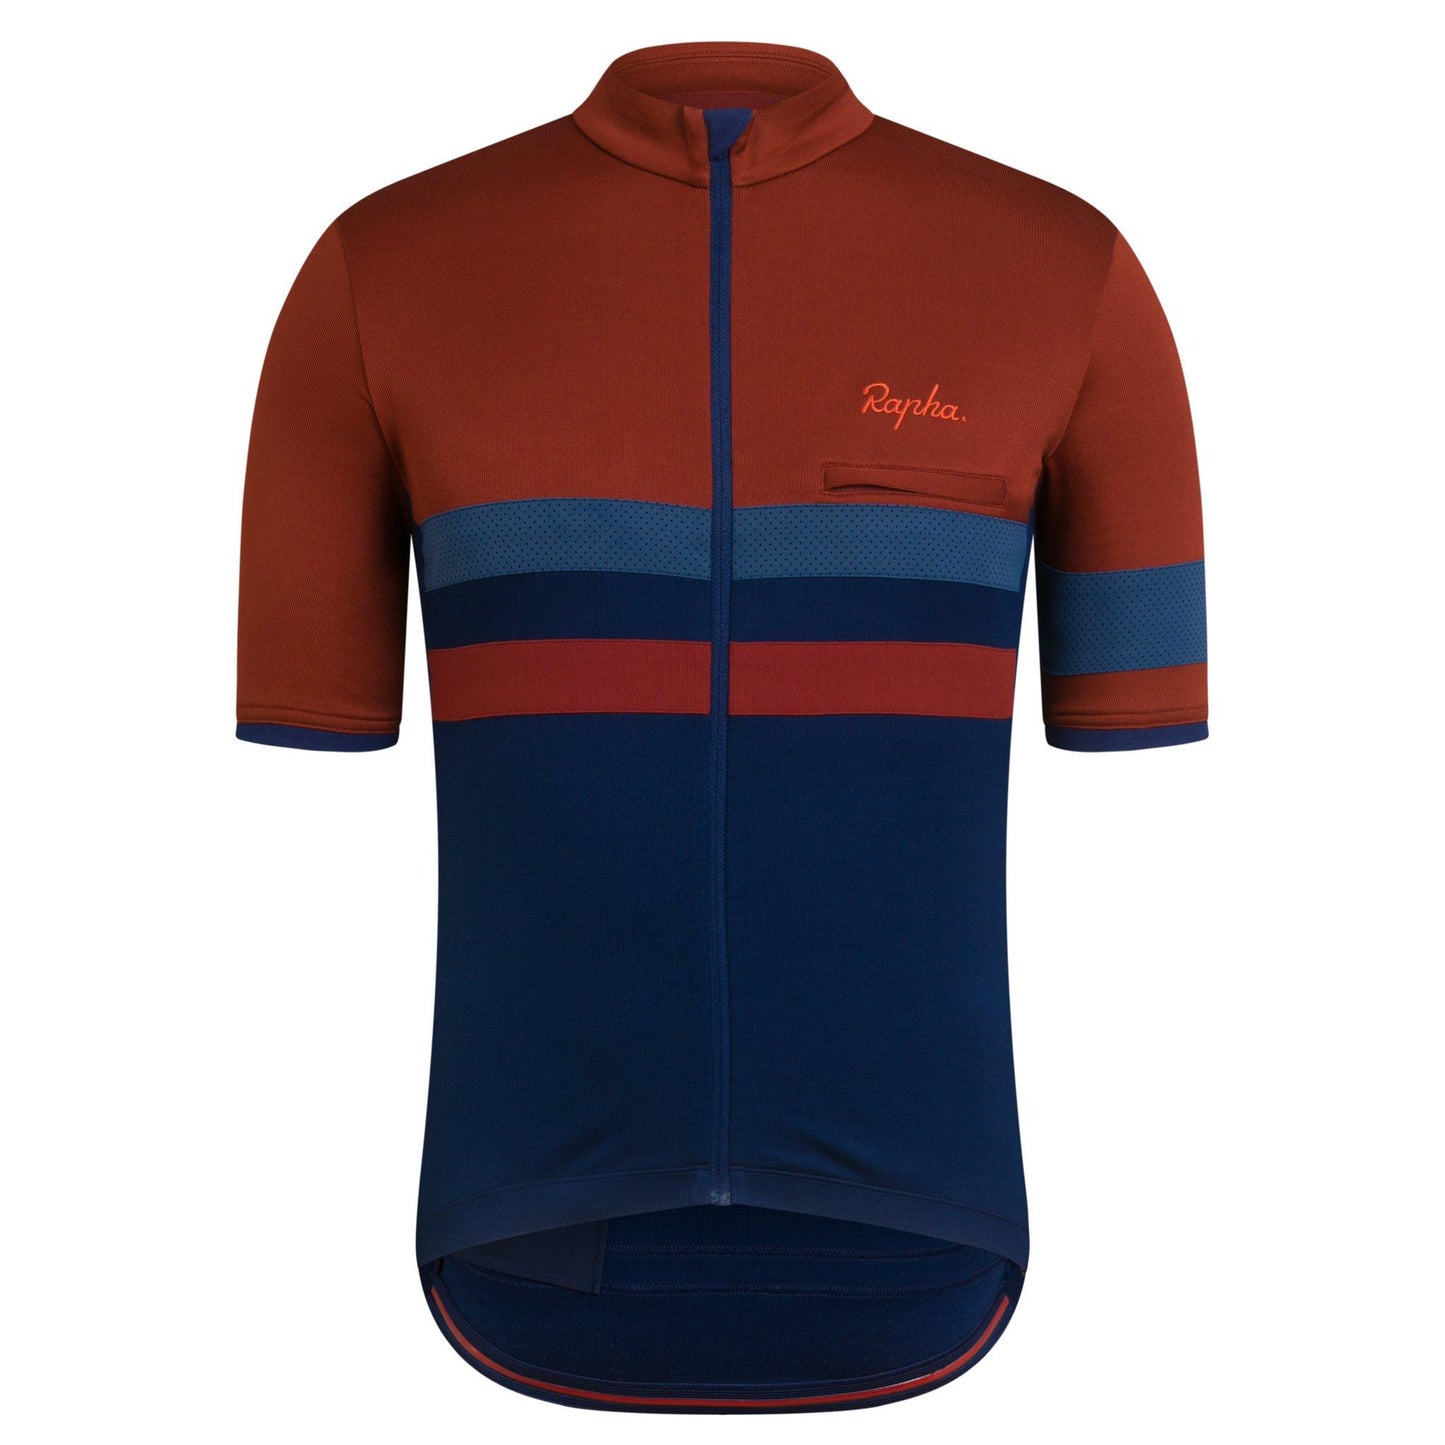 Rapha Mens Brevet Jersey - Brick buy online at Woolys Wheels Sydney with free delivery!